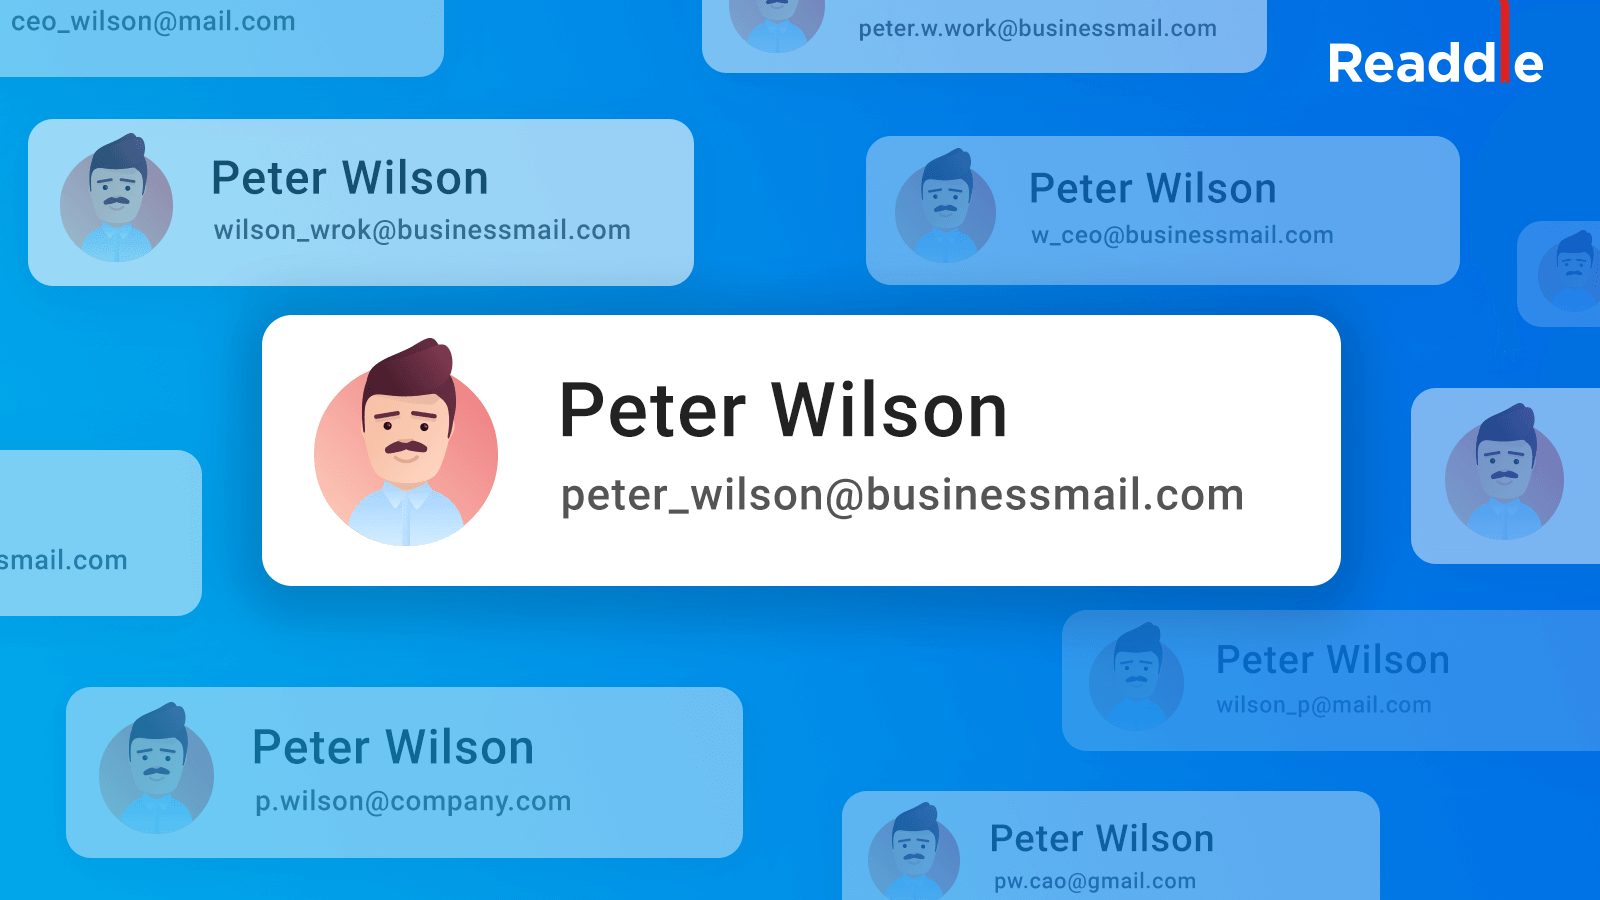 How do I get an email address with my company name in it?